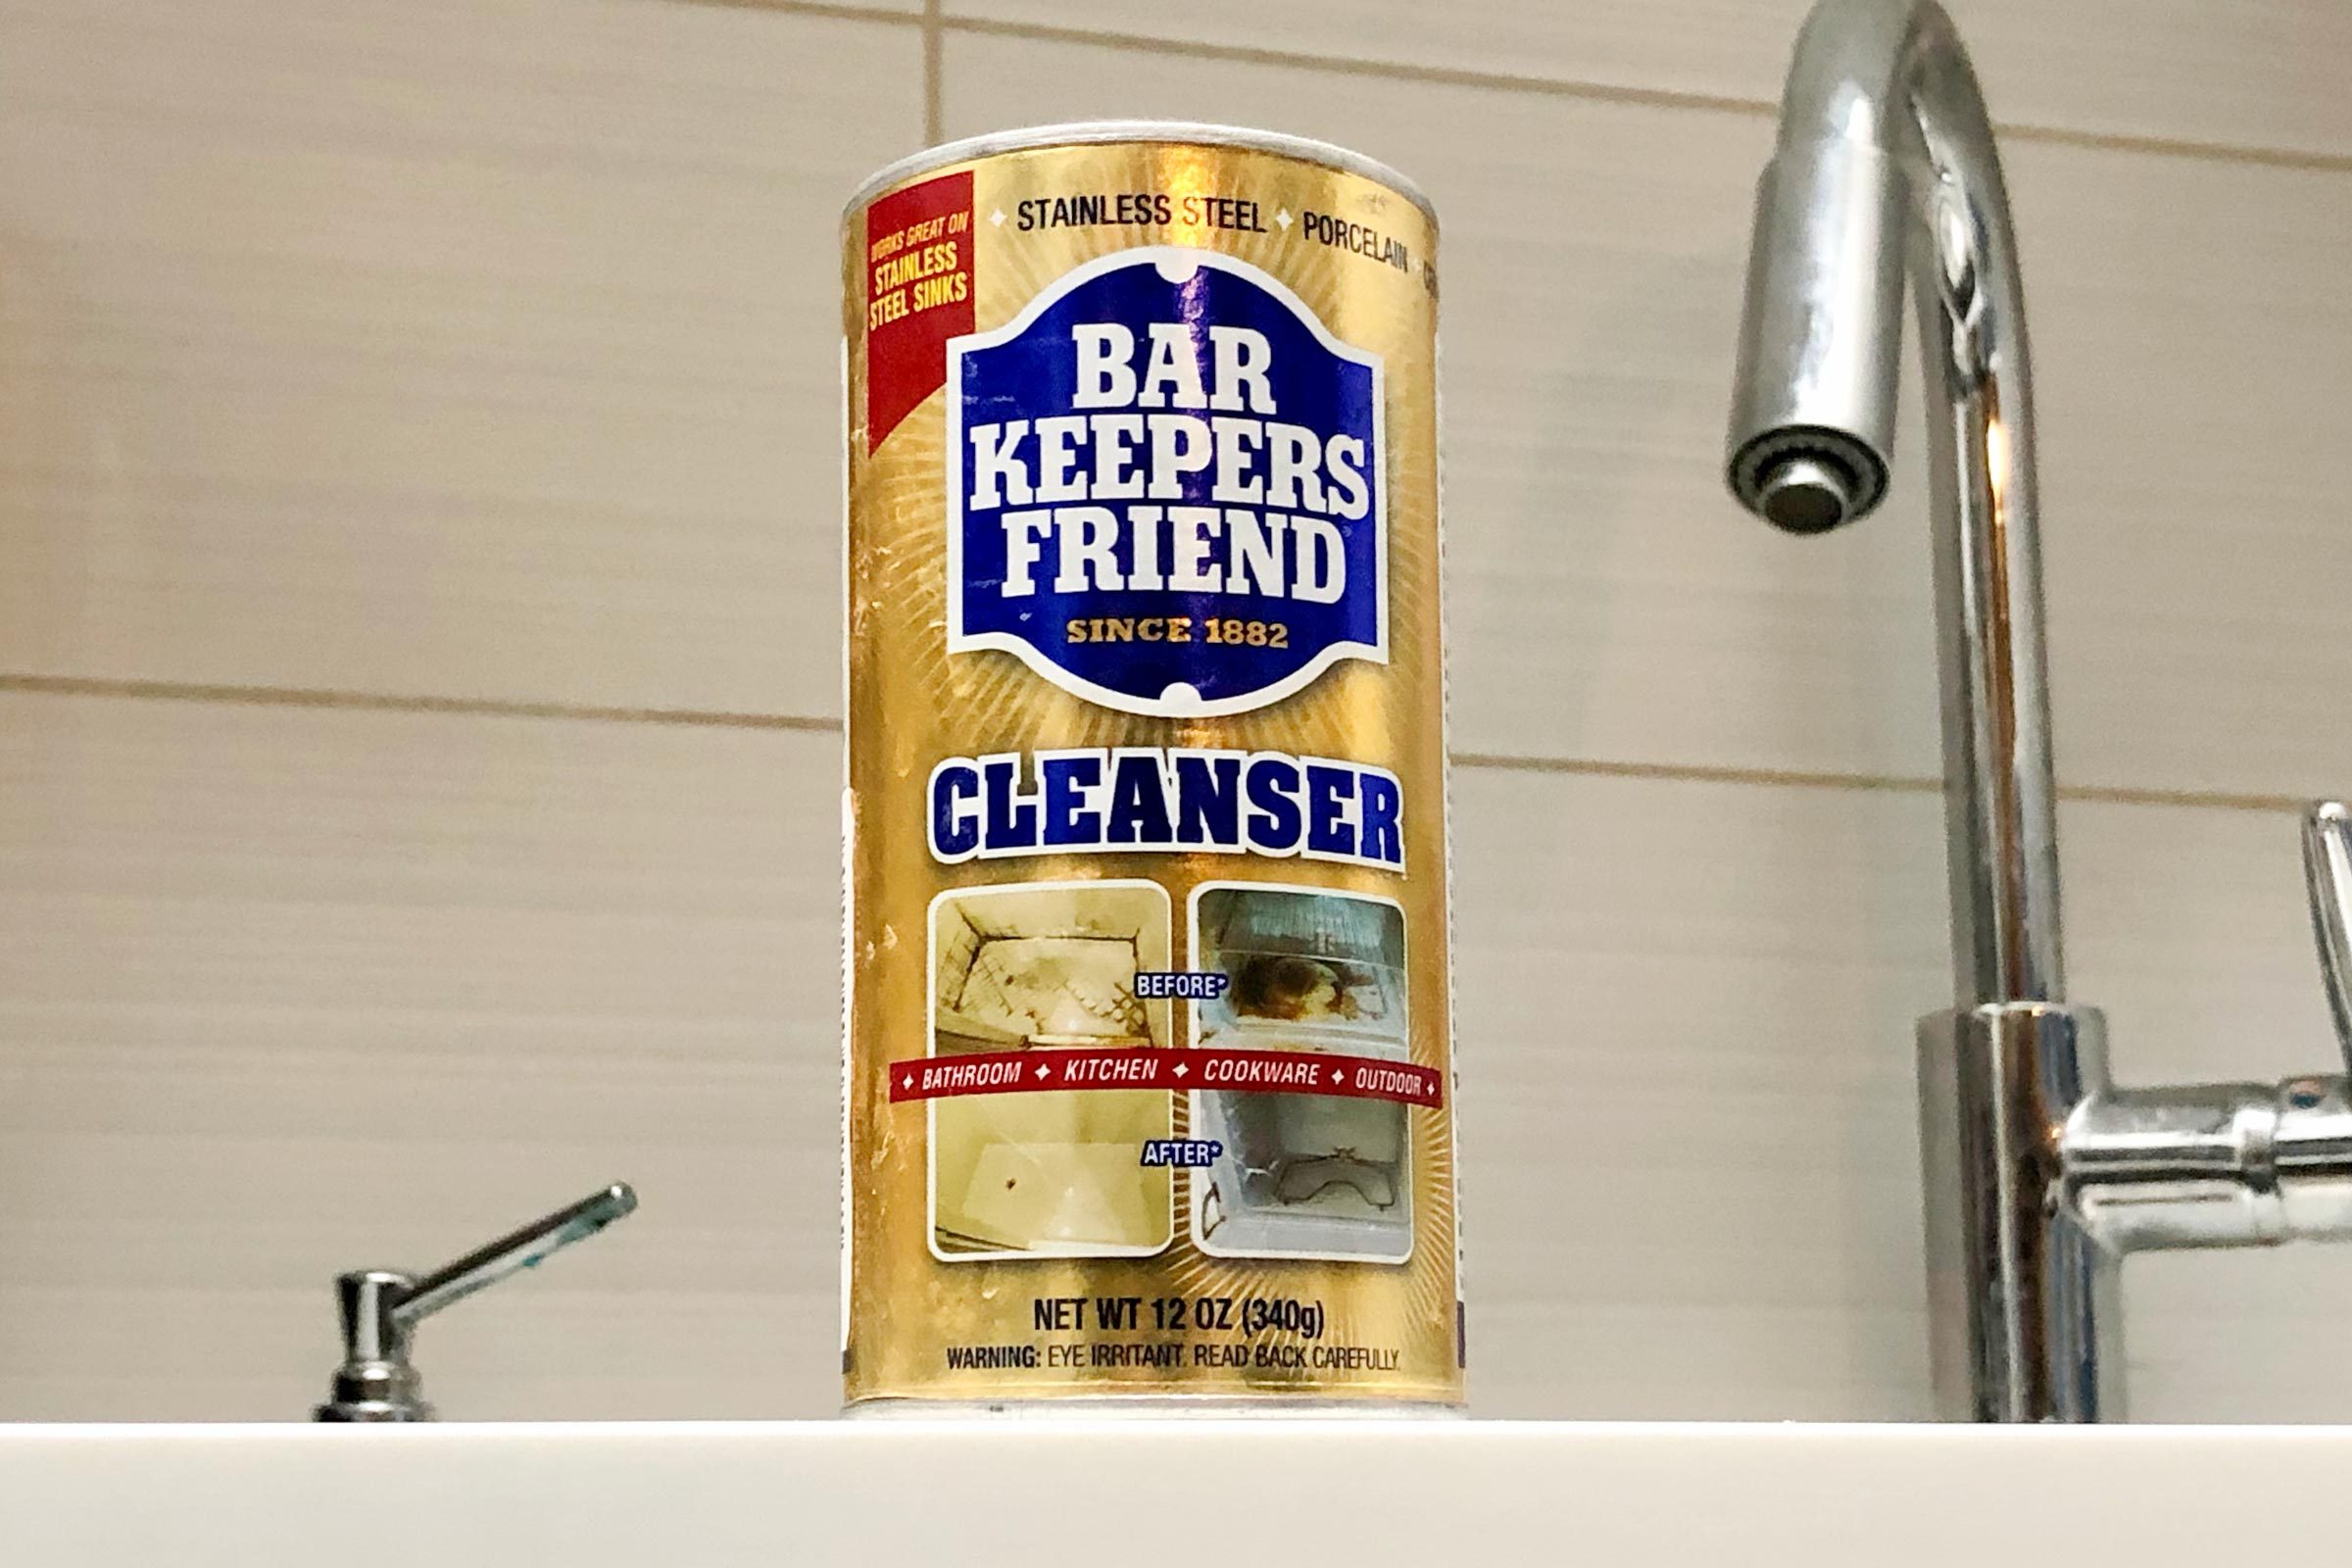 Bar Keepers Friend Cookware Stainless Steel / Polish Cleanser